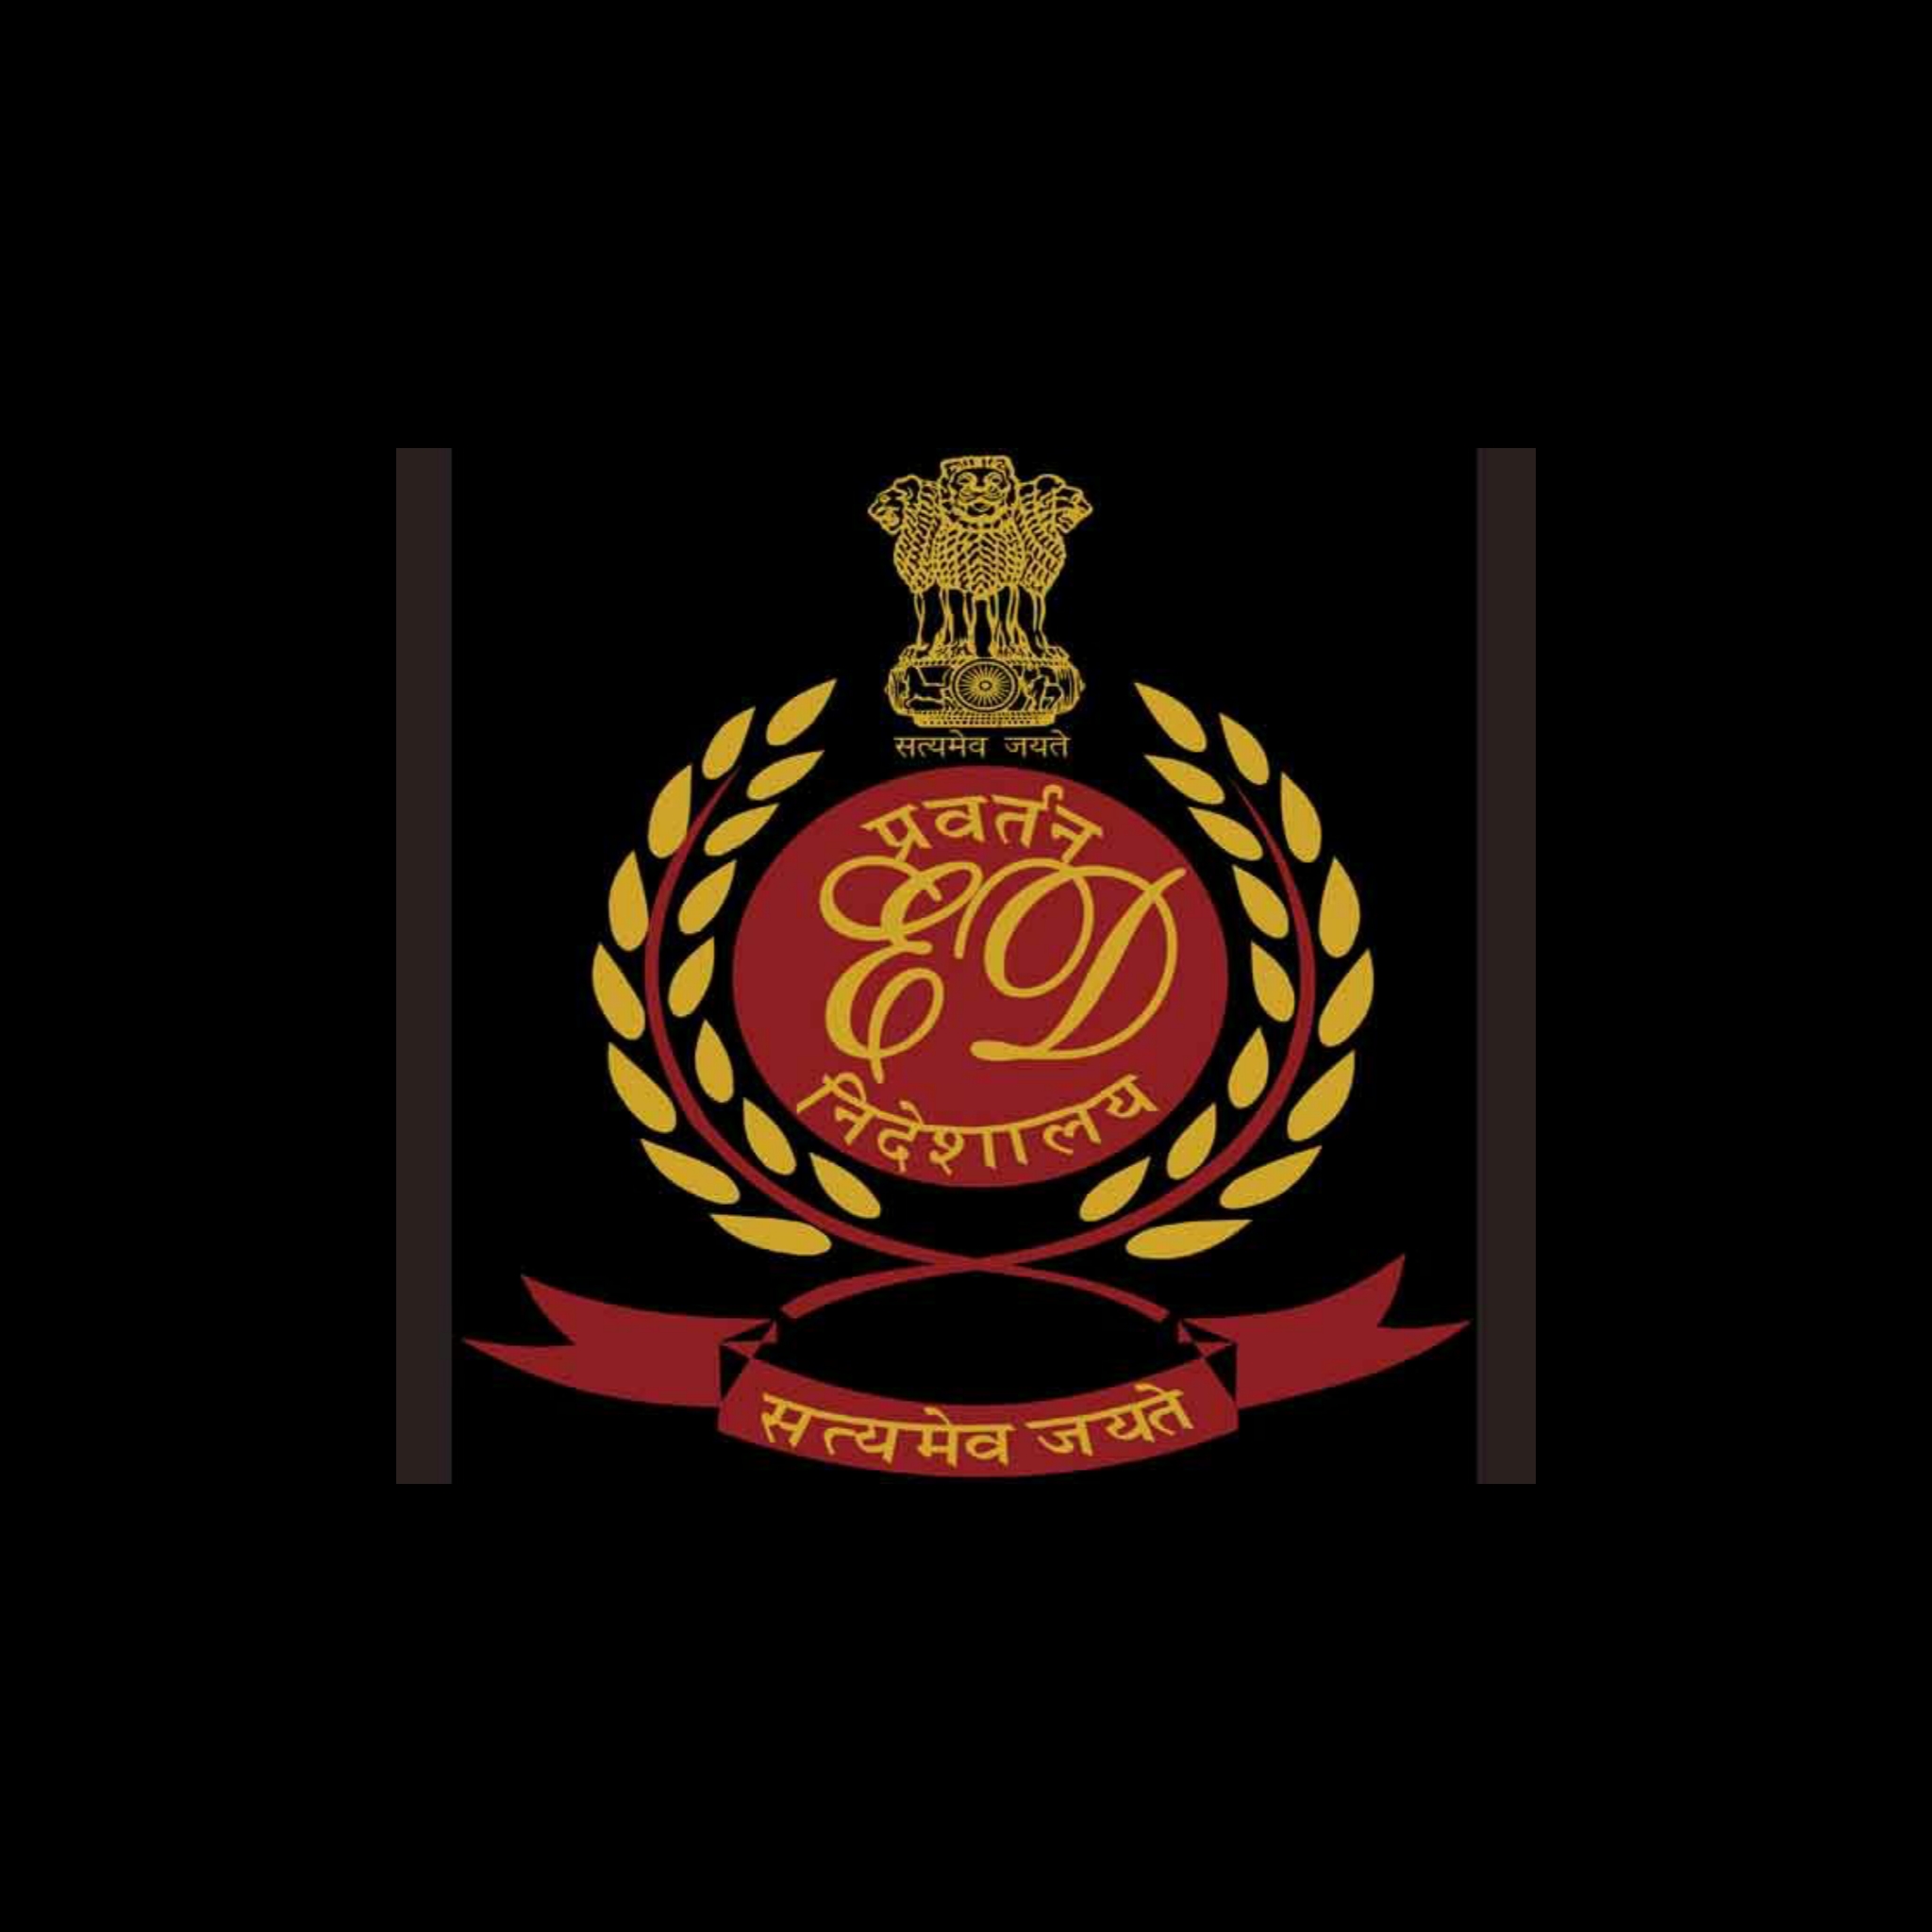 Enforcement Directorate, its Functions and Controversies